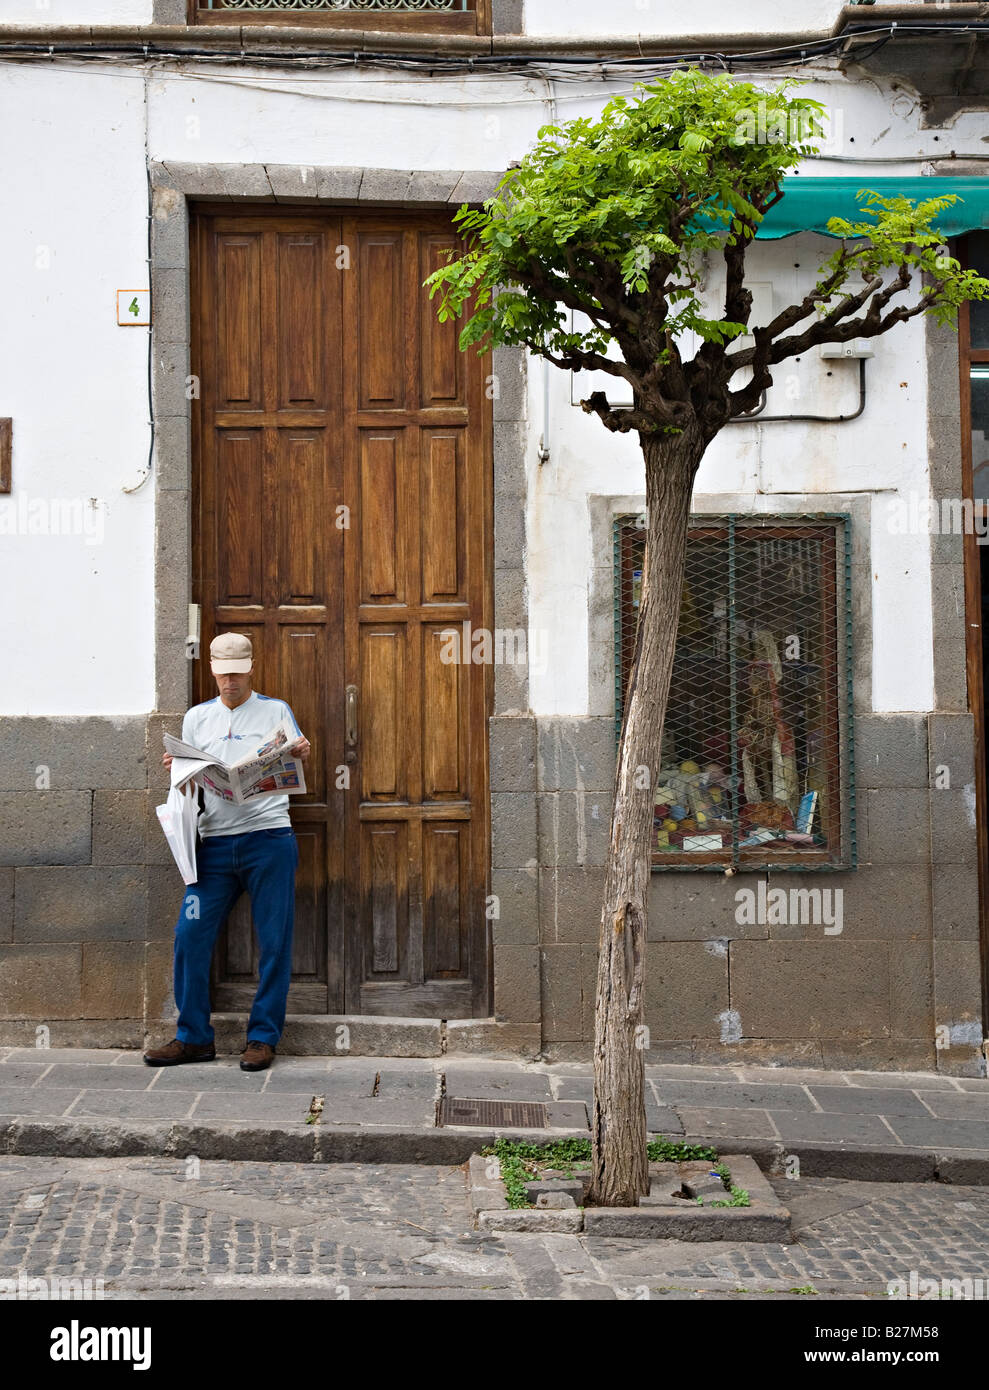 Man Standing in street reading newspaper Teror Gran Canaria Espagne Banque D'Images